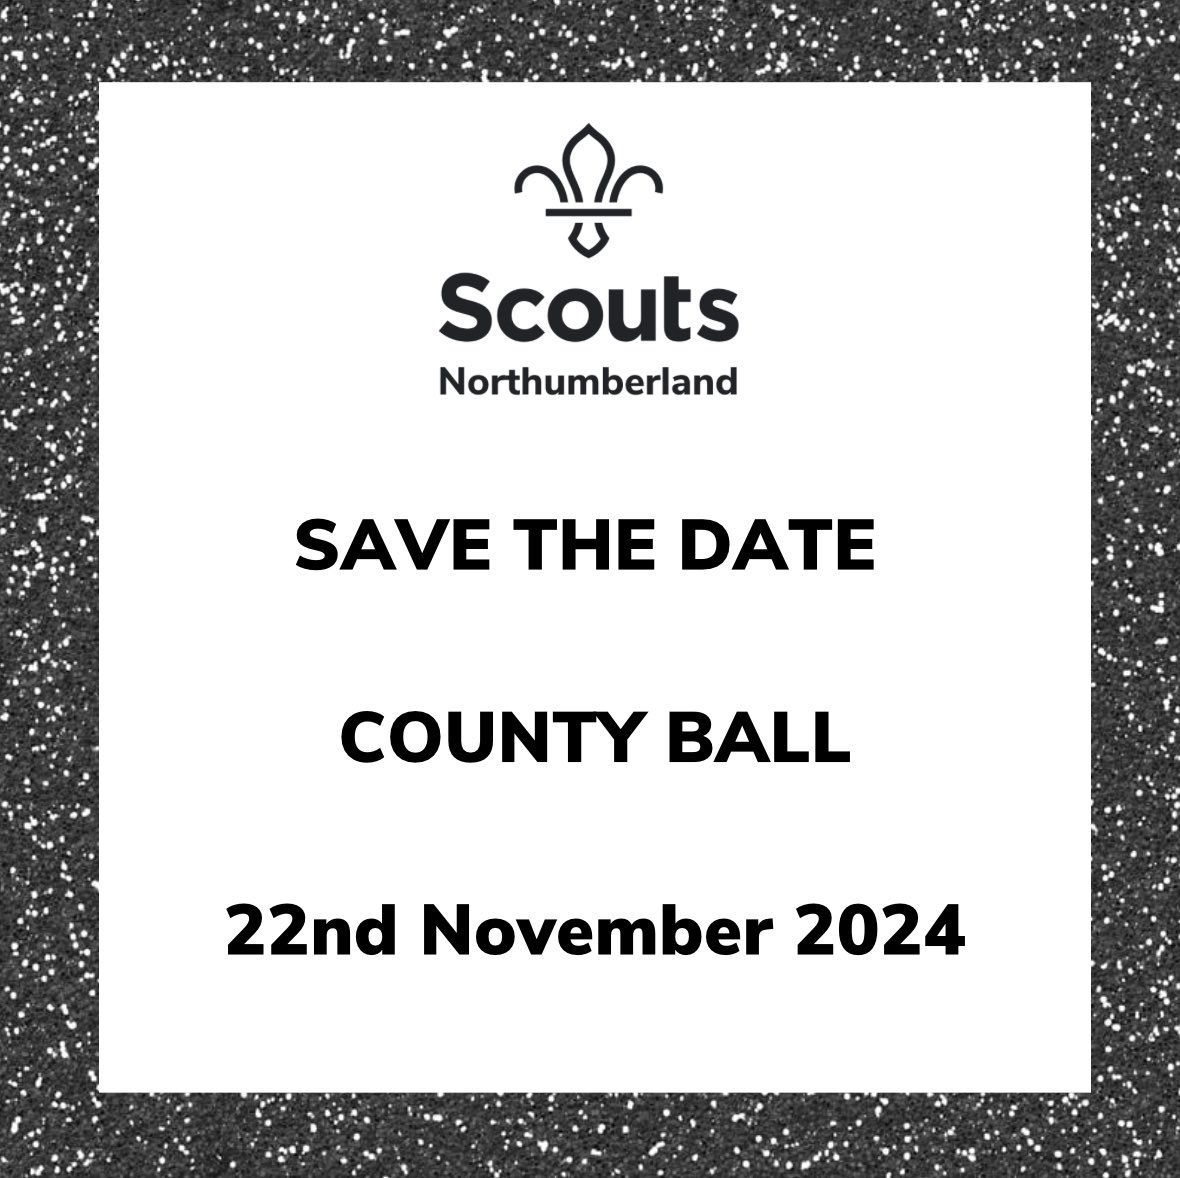 Northumberland Scouts (@NorthlandScouts) on Twitter photo 2024-04-10 19:59:06